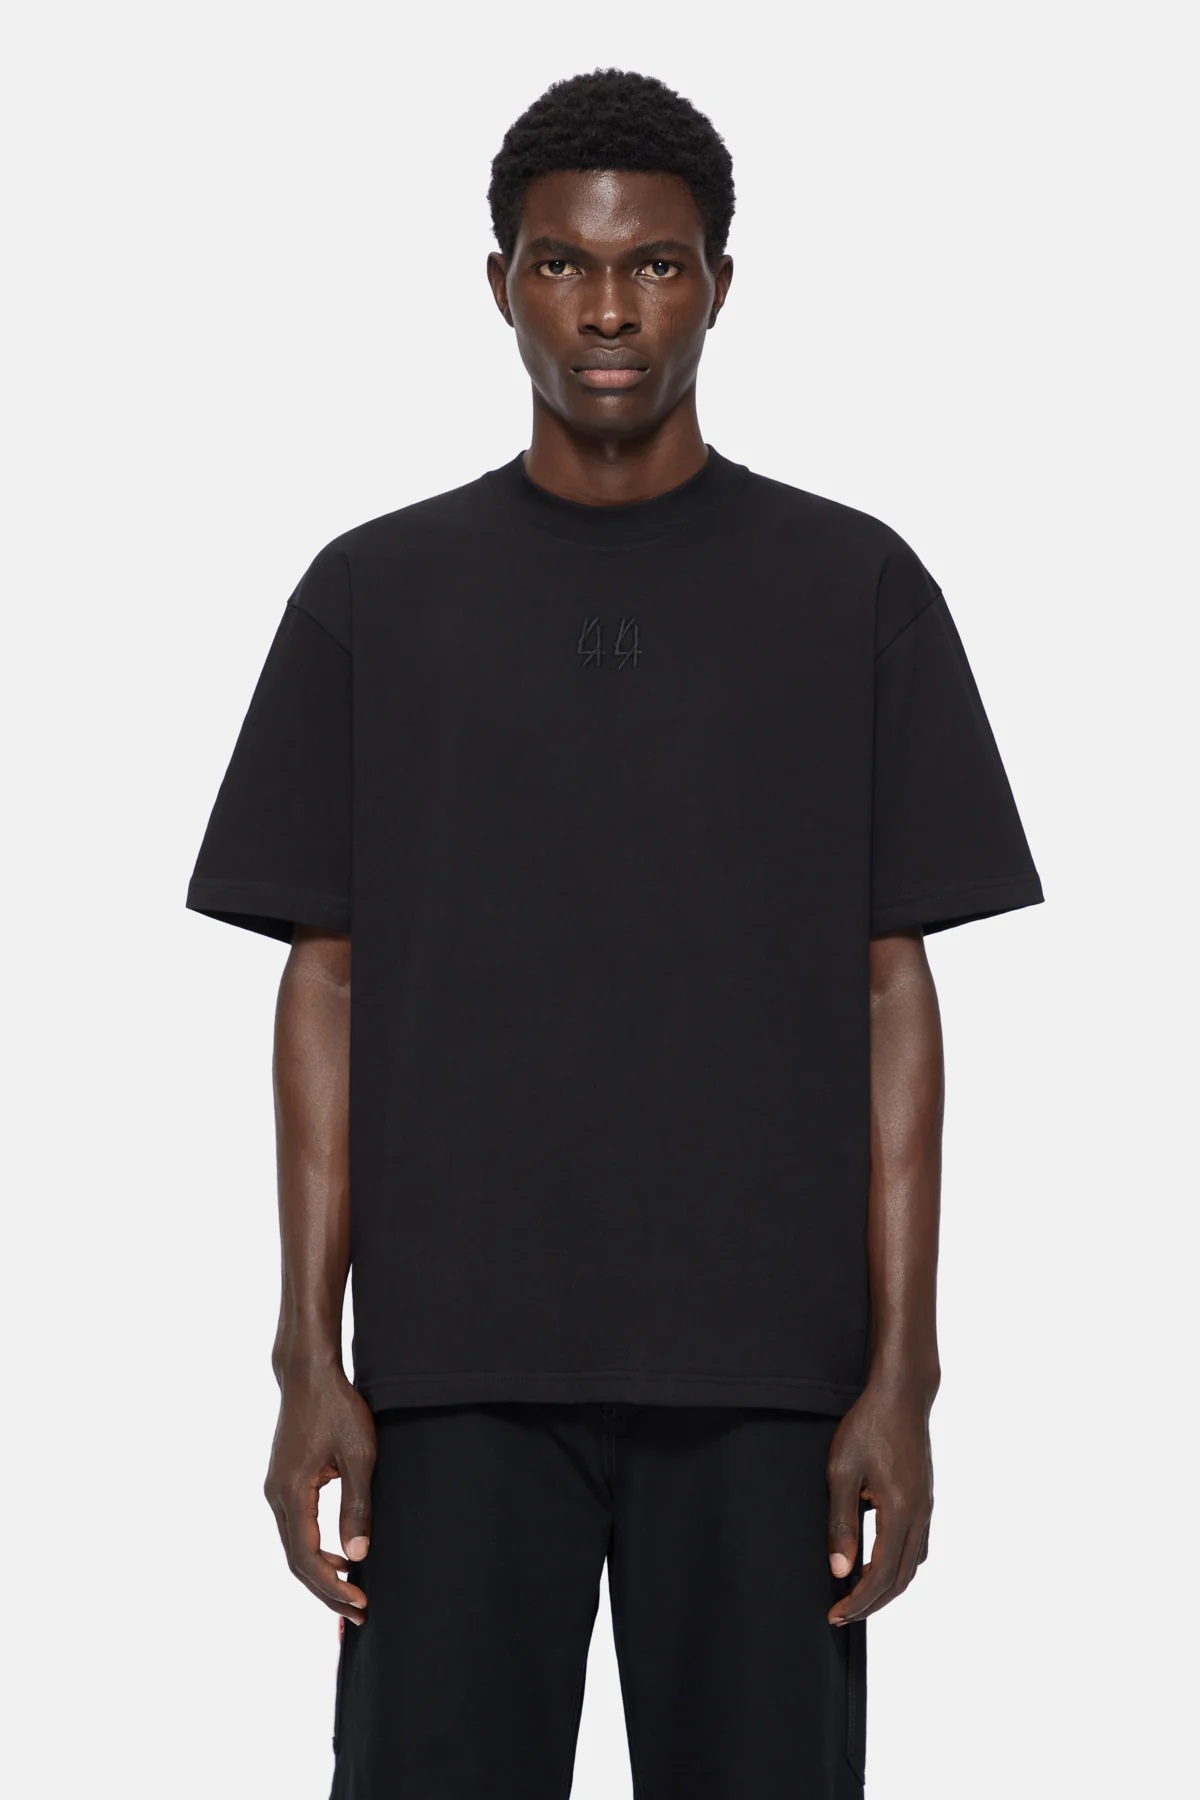 44 LABEL GROUP Arabic Dial Tee in Black L